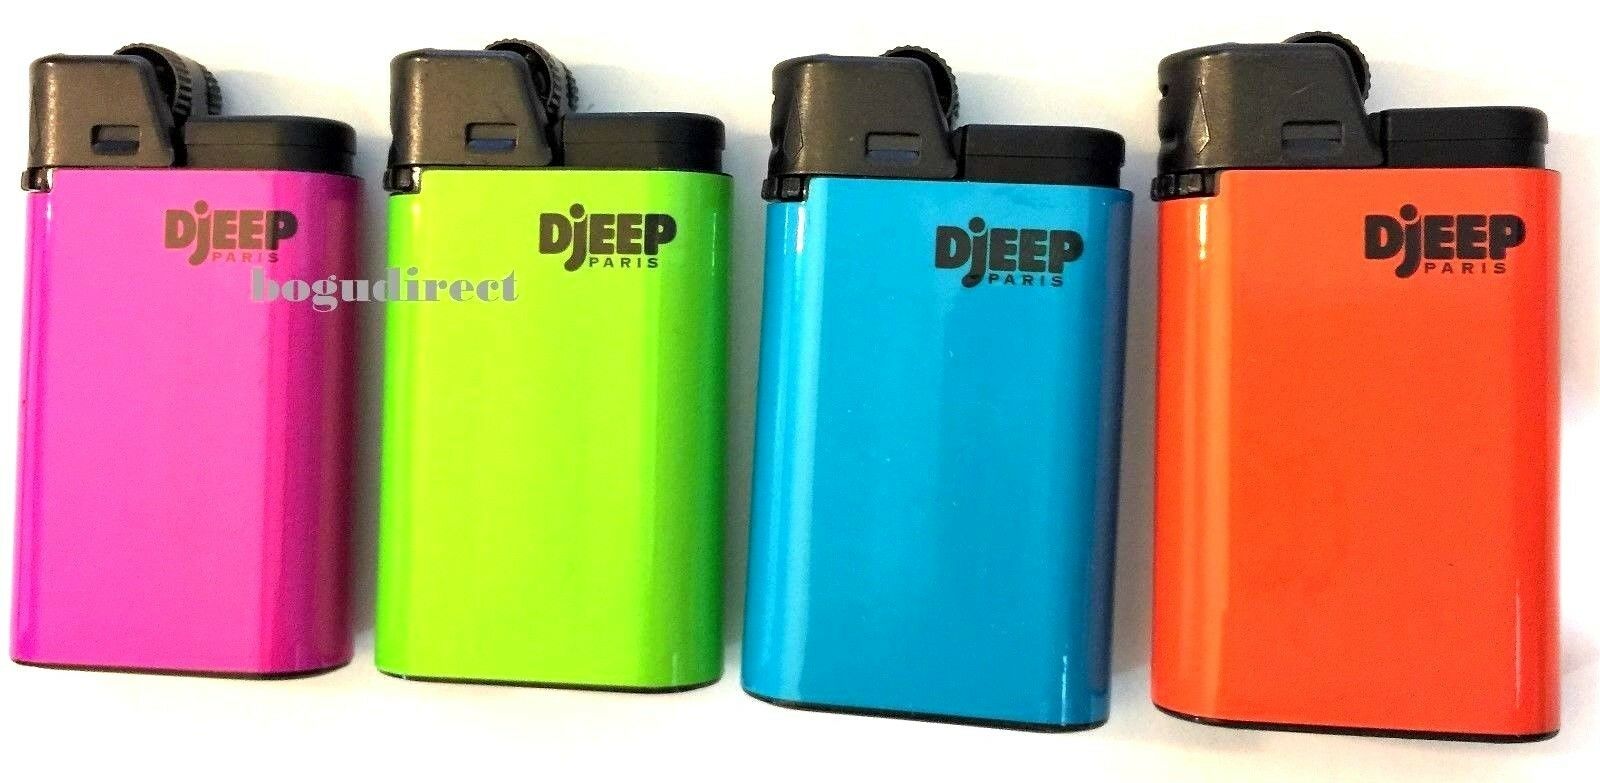 Djeep Large Lighter Hot Body Neon Colors 4 Pcs